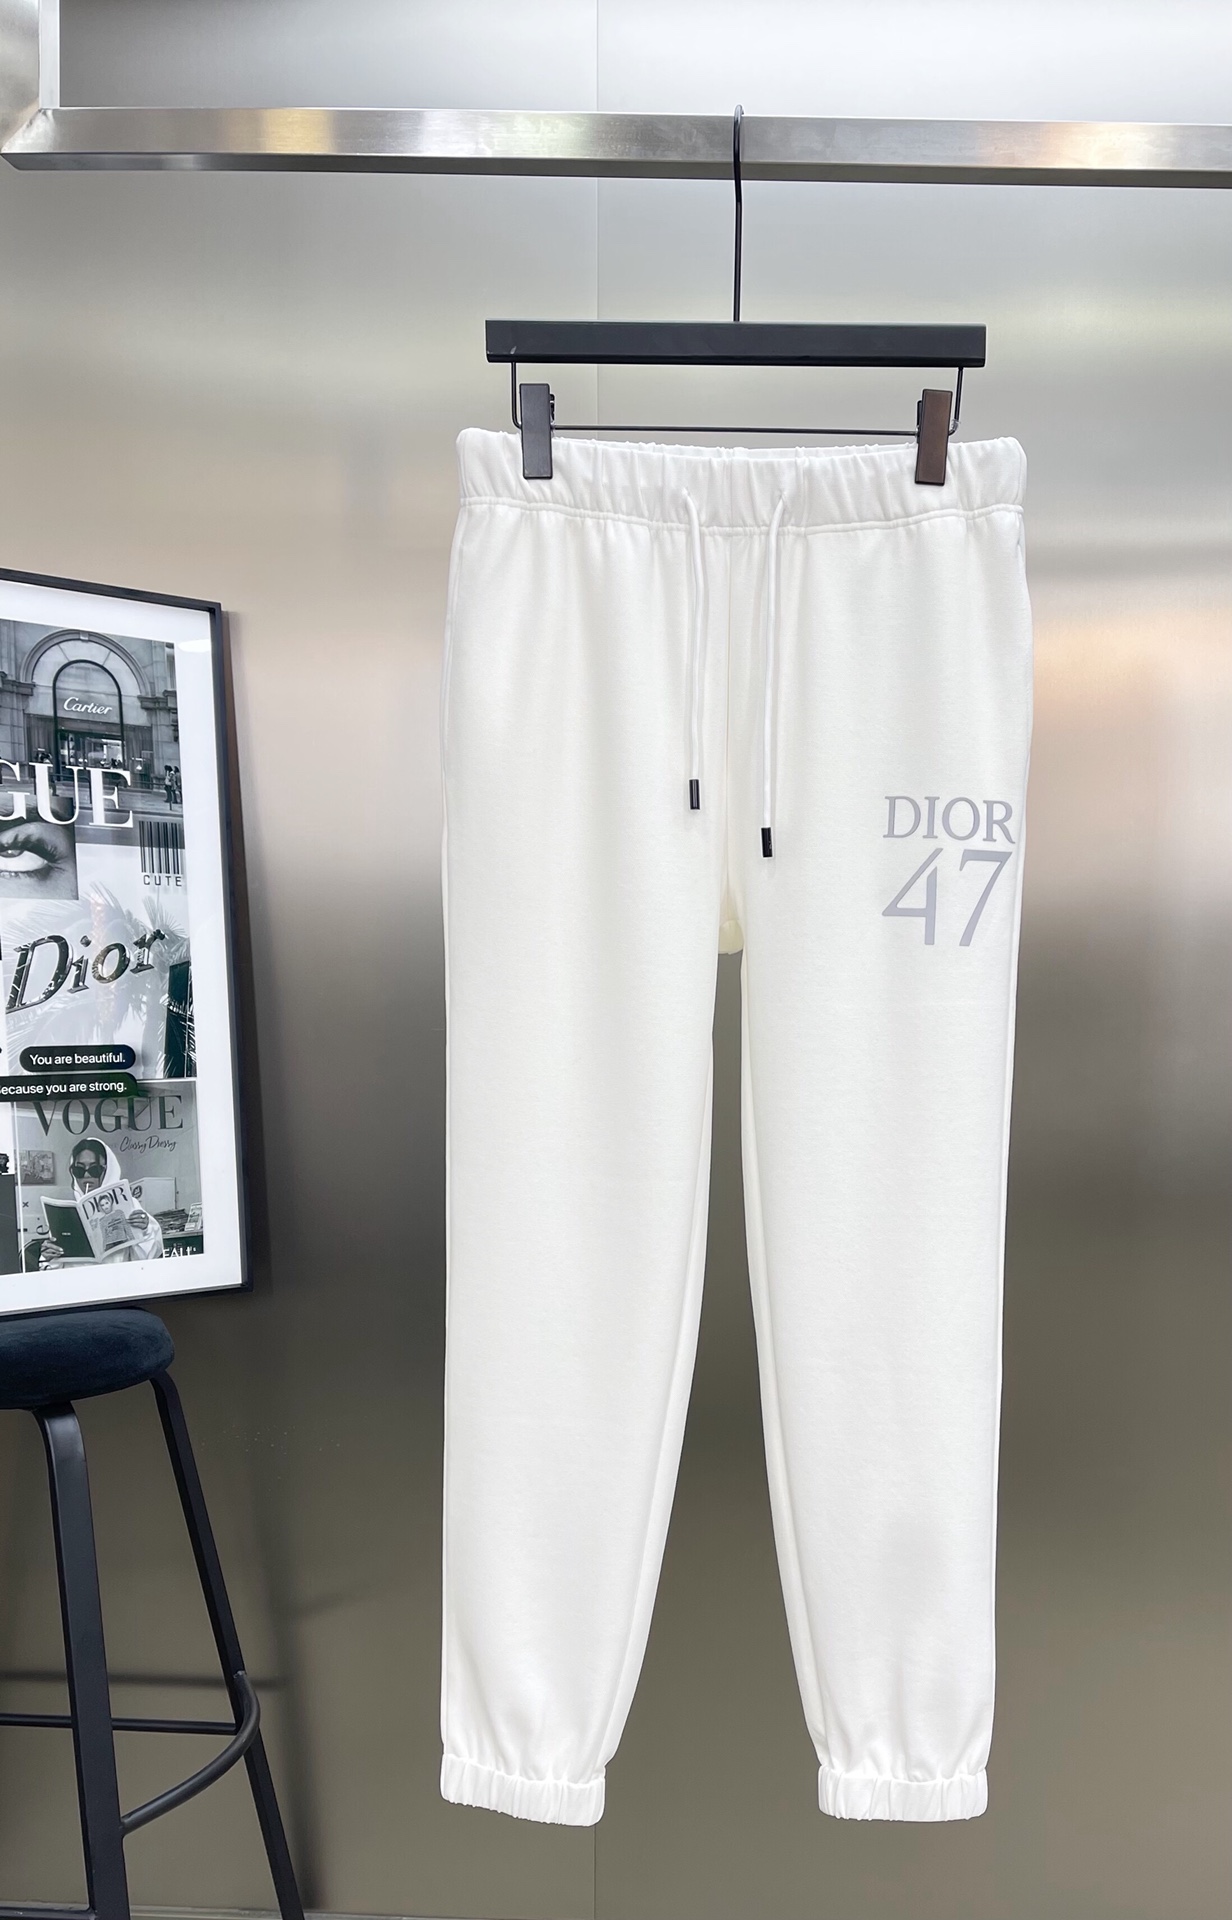 Dior Clothing Shirts & Blouses Two Piece Outfits & Matching Sets Black Coffee Color White Printing Cotton Spring Collection Fashion Sweatpants